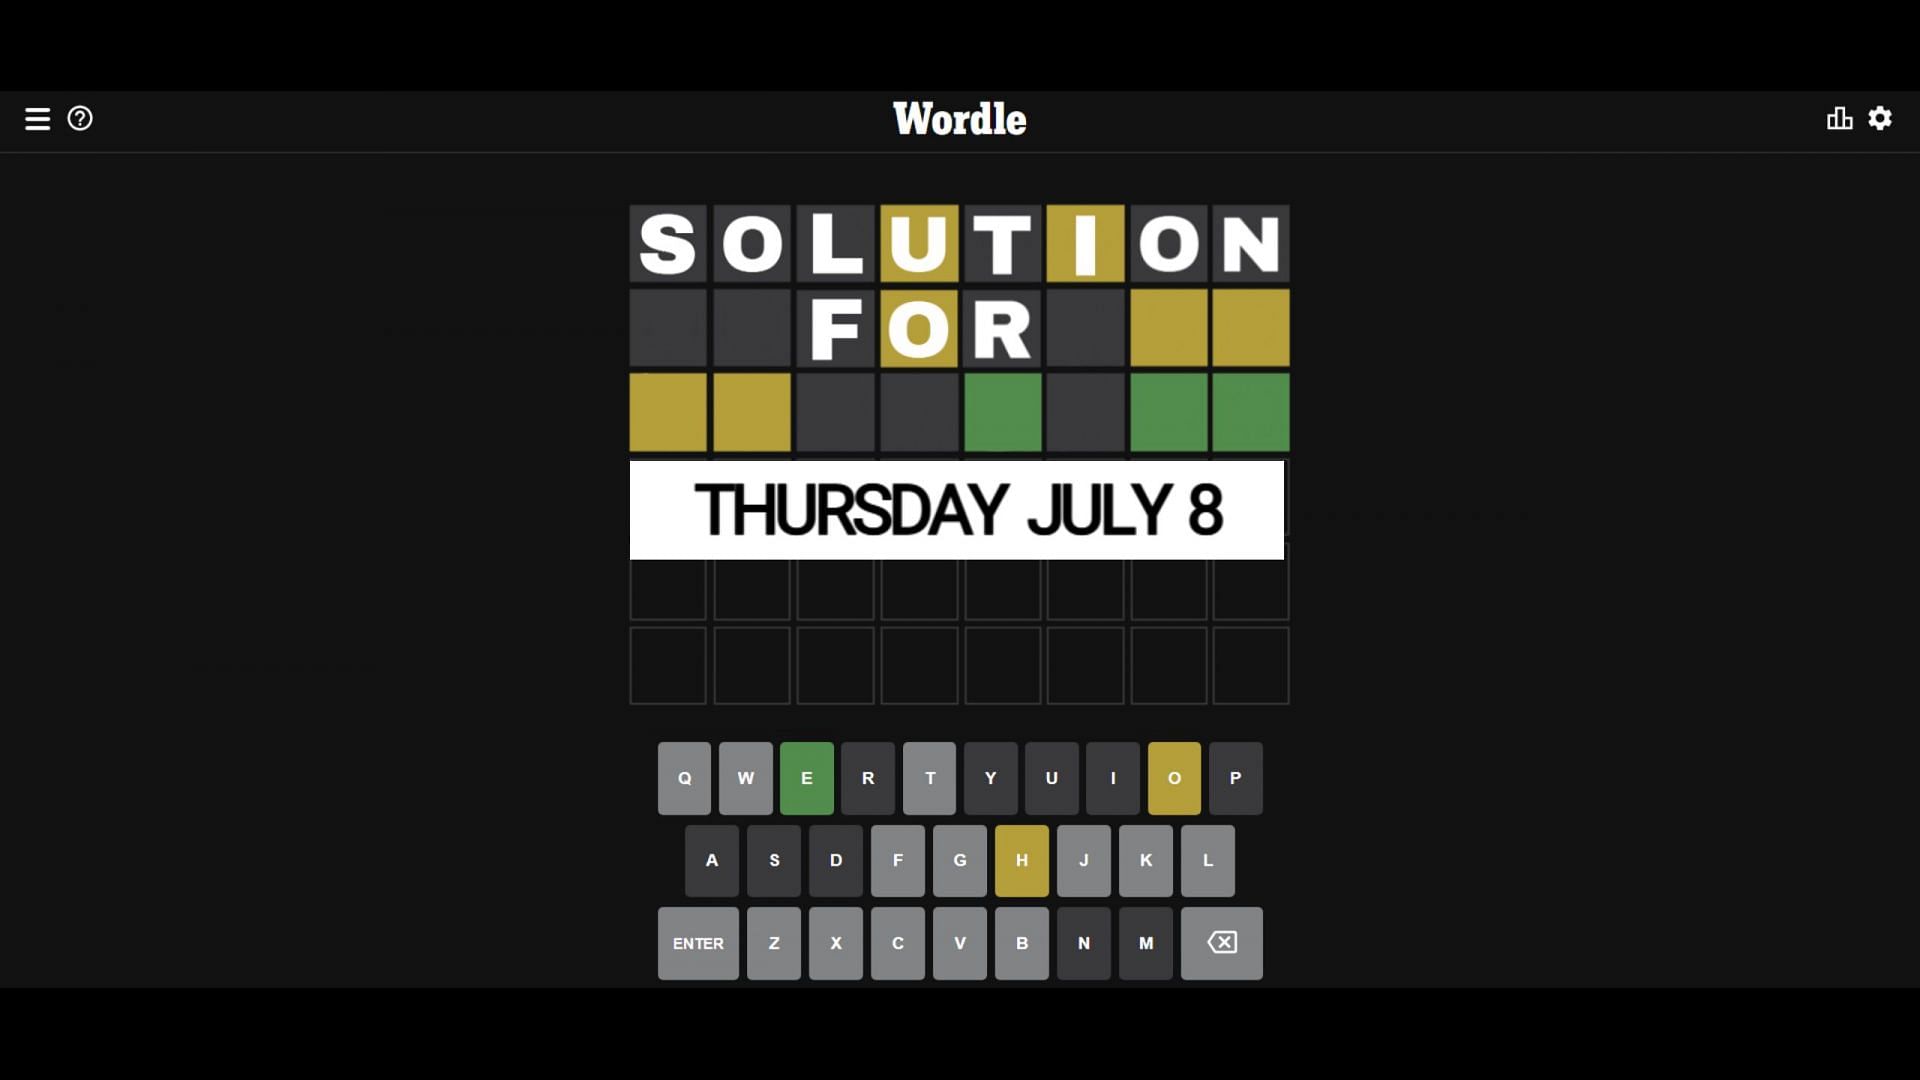 Play 8 simultaneous Wordle puzzles in Octordle